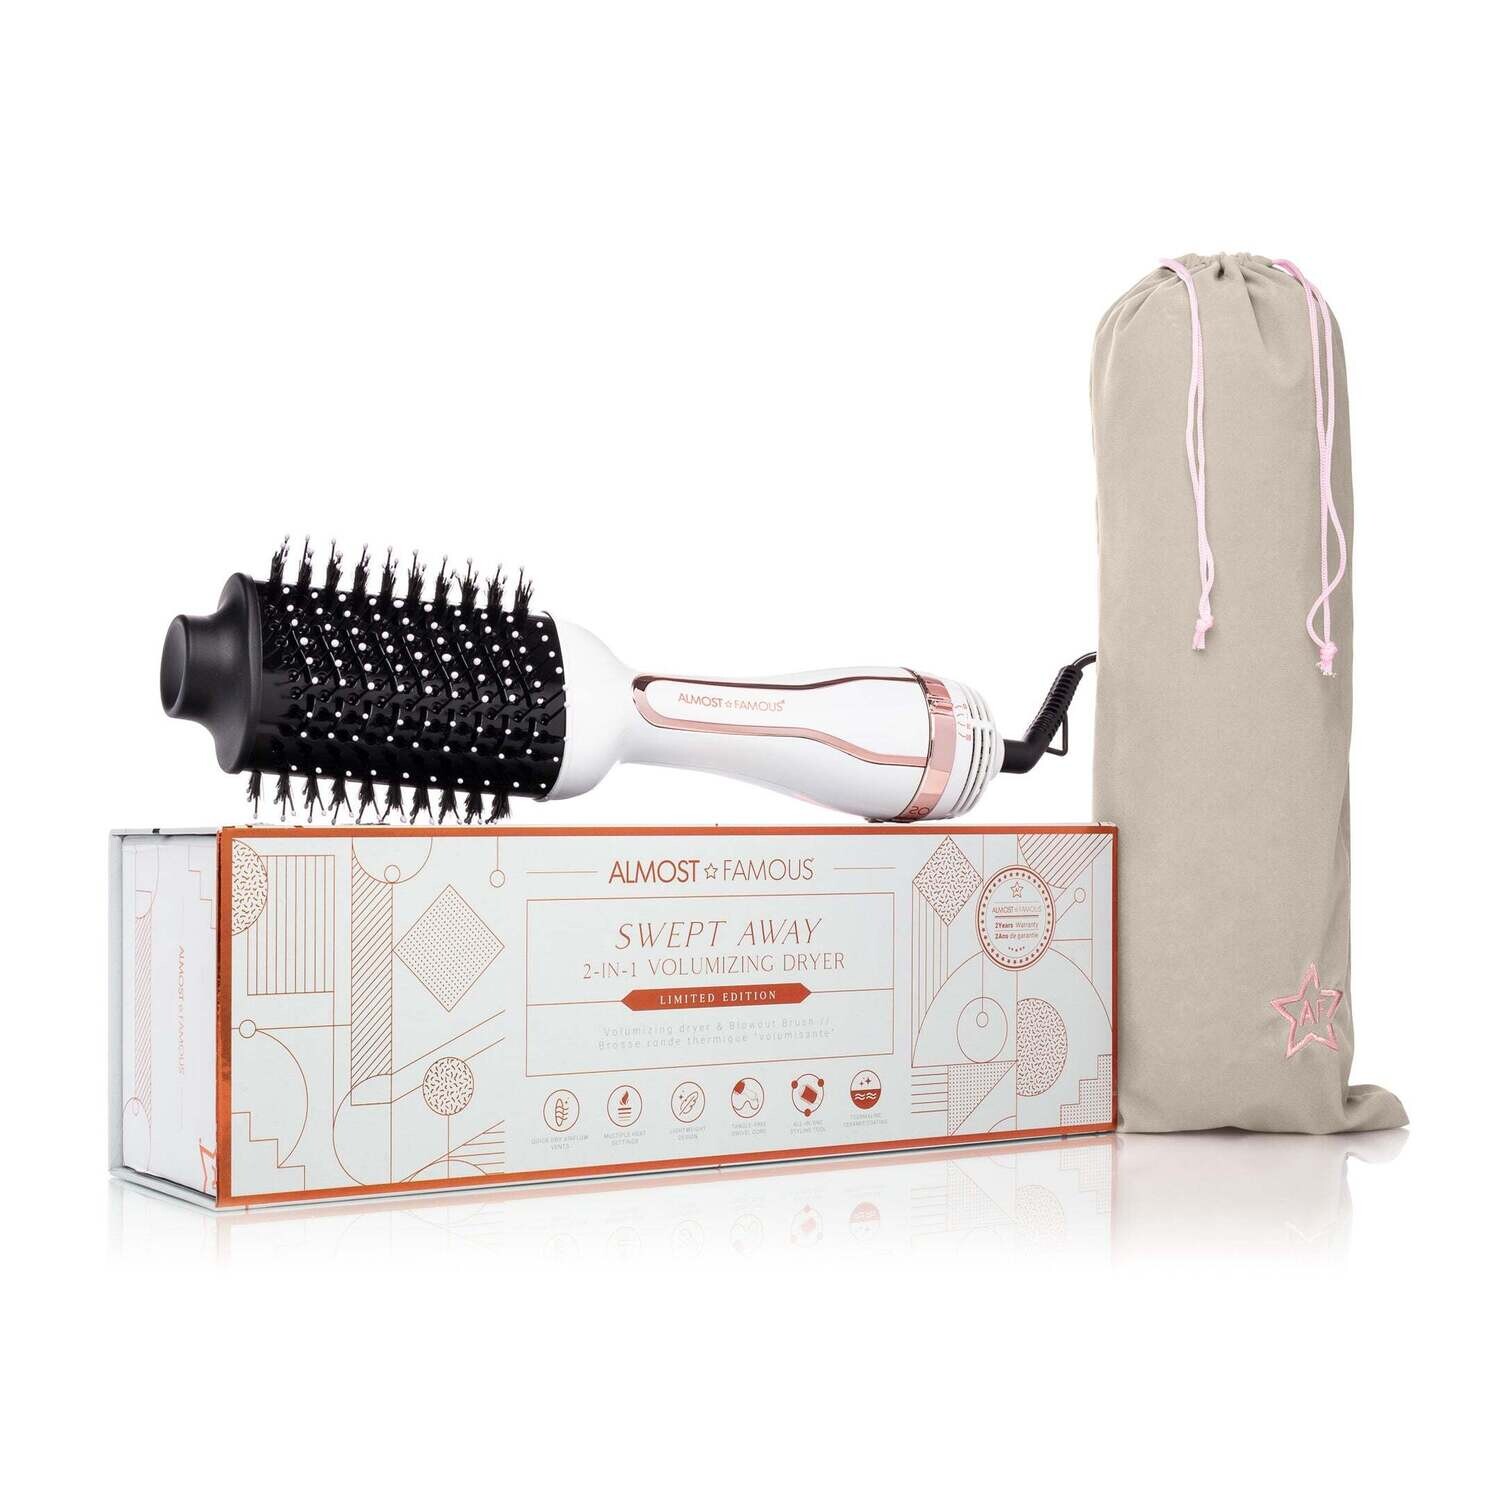 AF Swept Away 2-in-1 Volumizing Dryer Blowout Brush